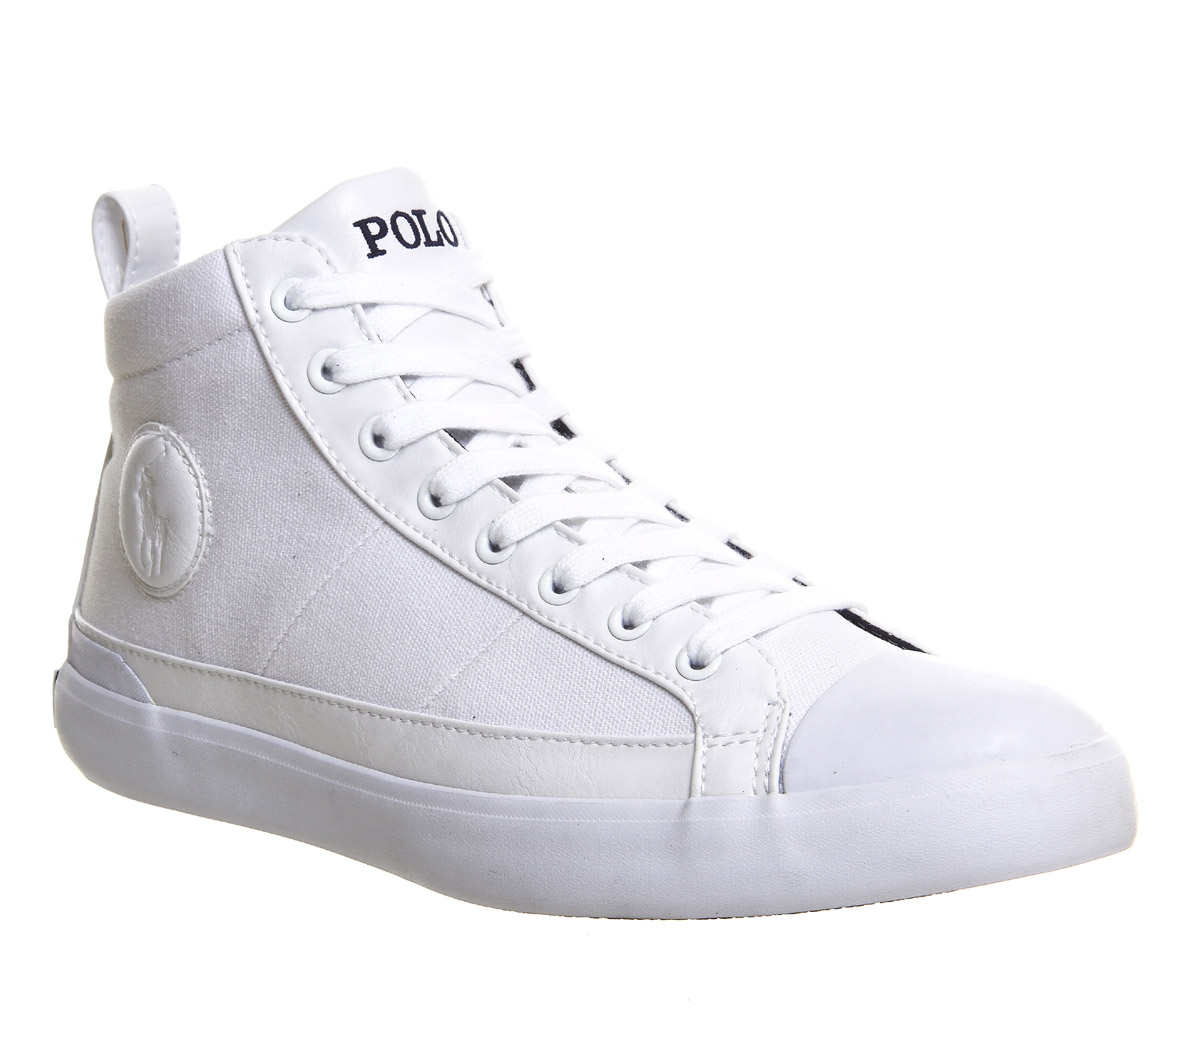 Polo Ralph LaurenClarke TrainersPure White